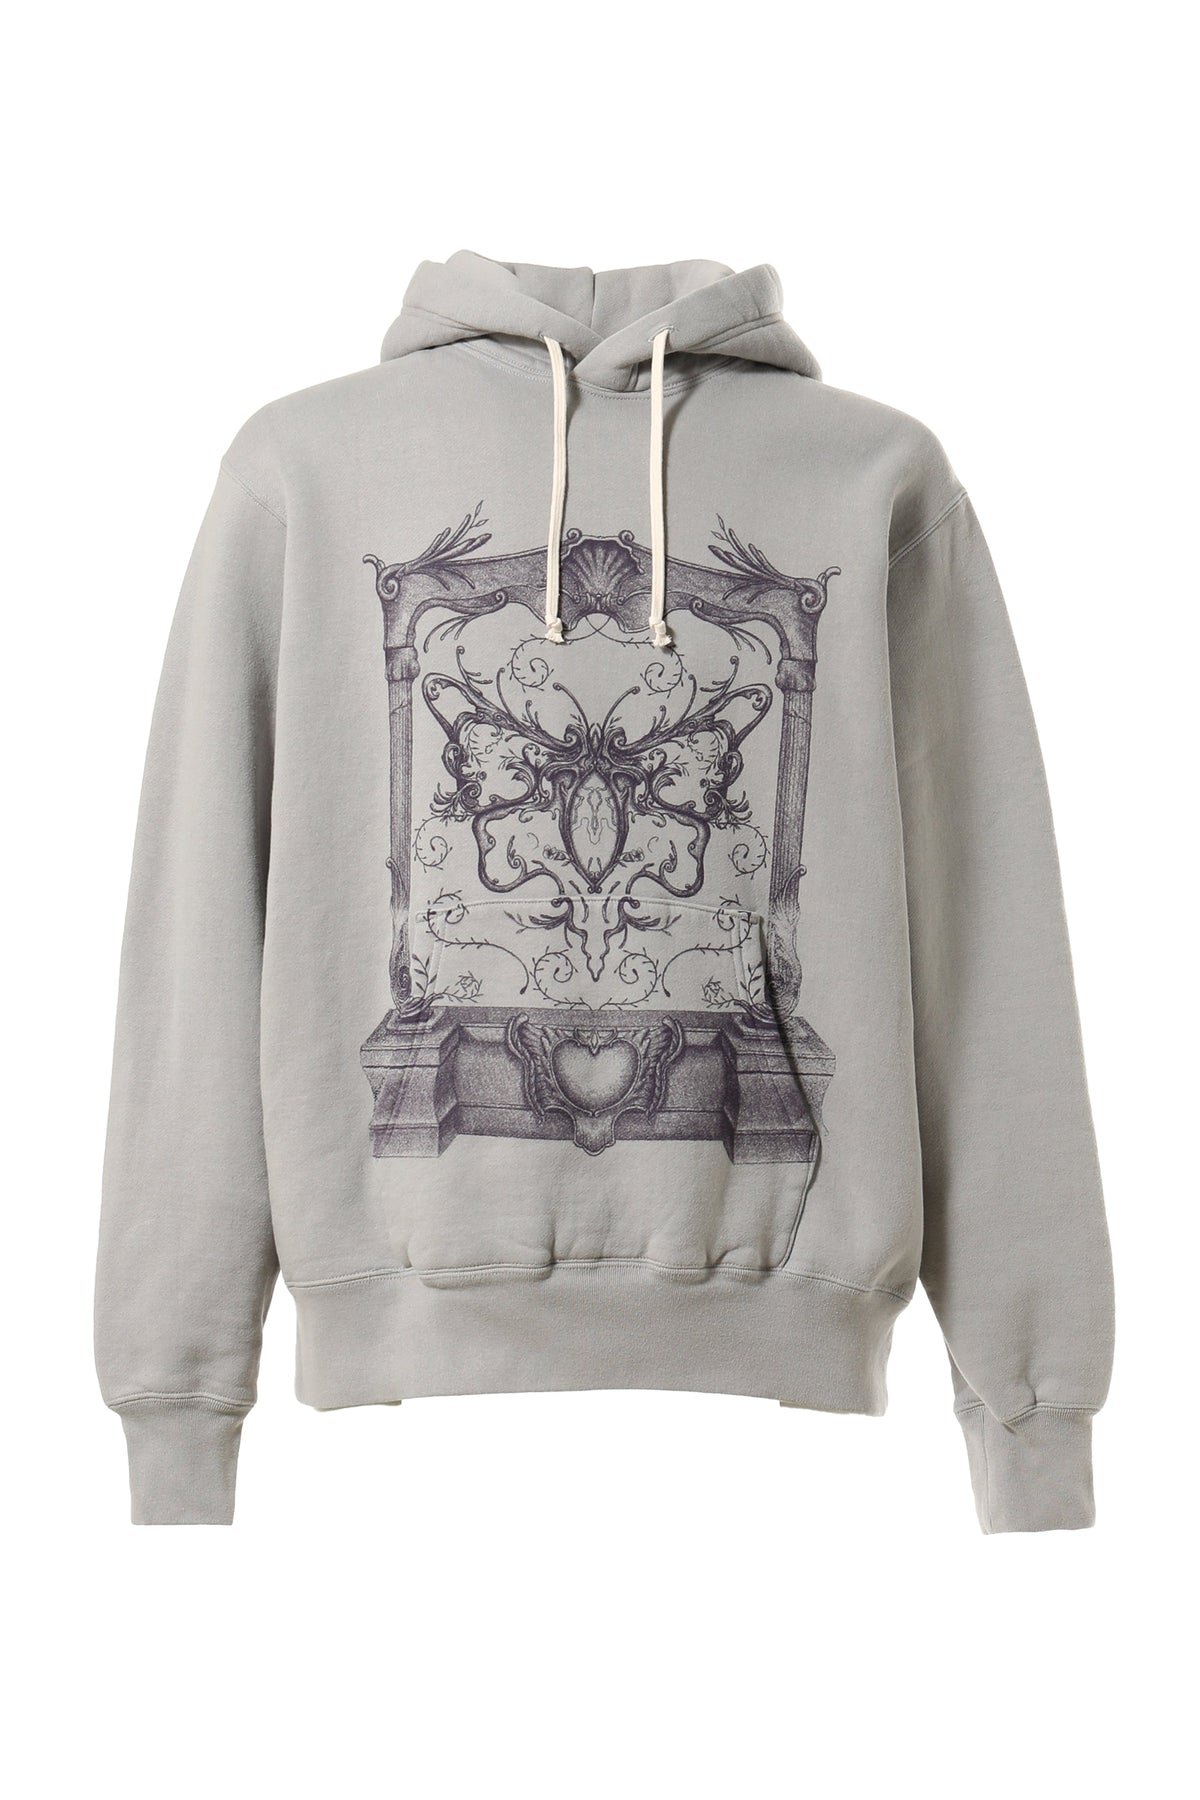 GATE BY SORA AOTA PULLOVER HOODIE / GRY